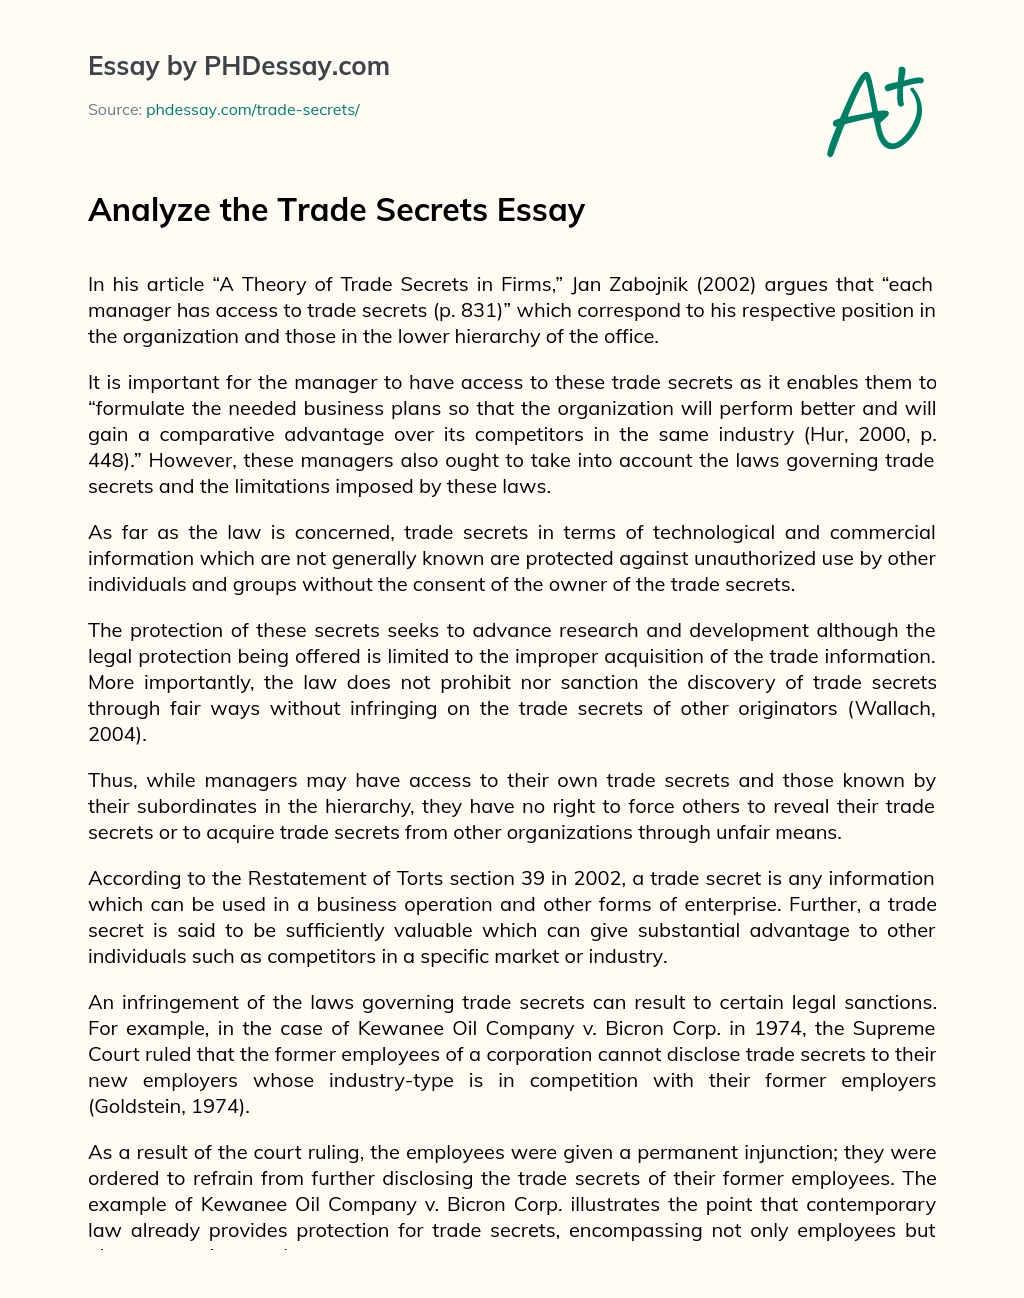 Trade Secrets in Firms: Balancing Access and Legal Protection essay